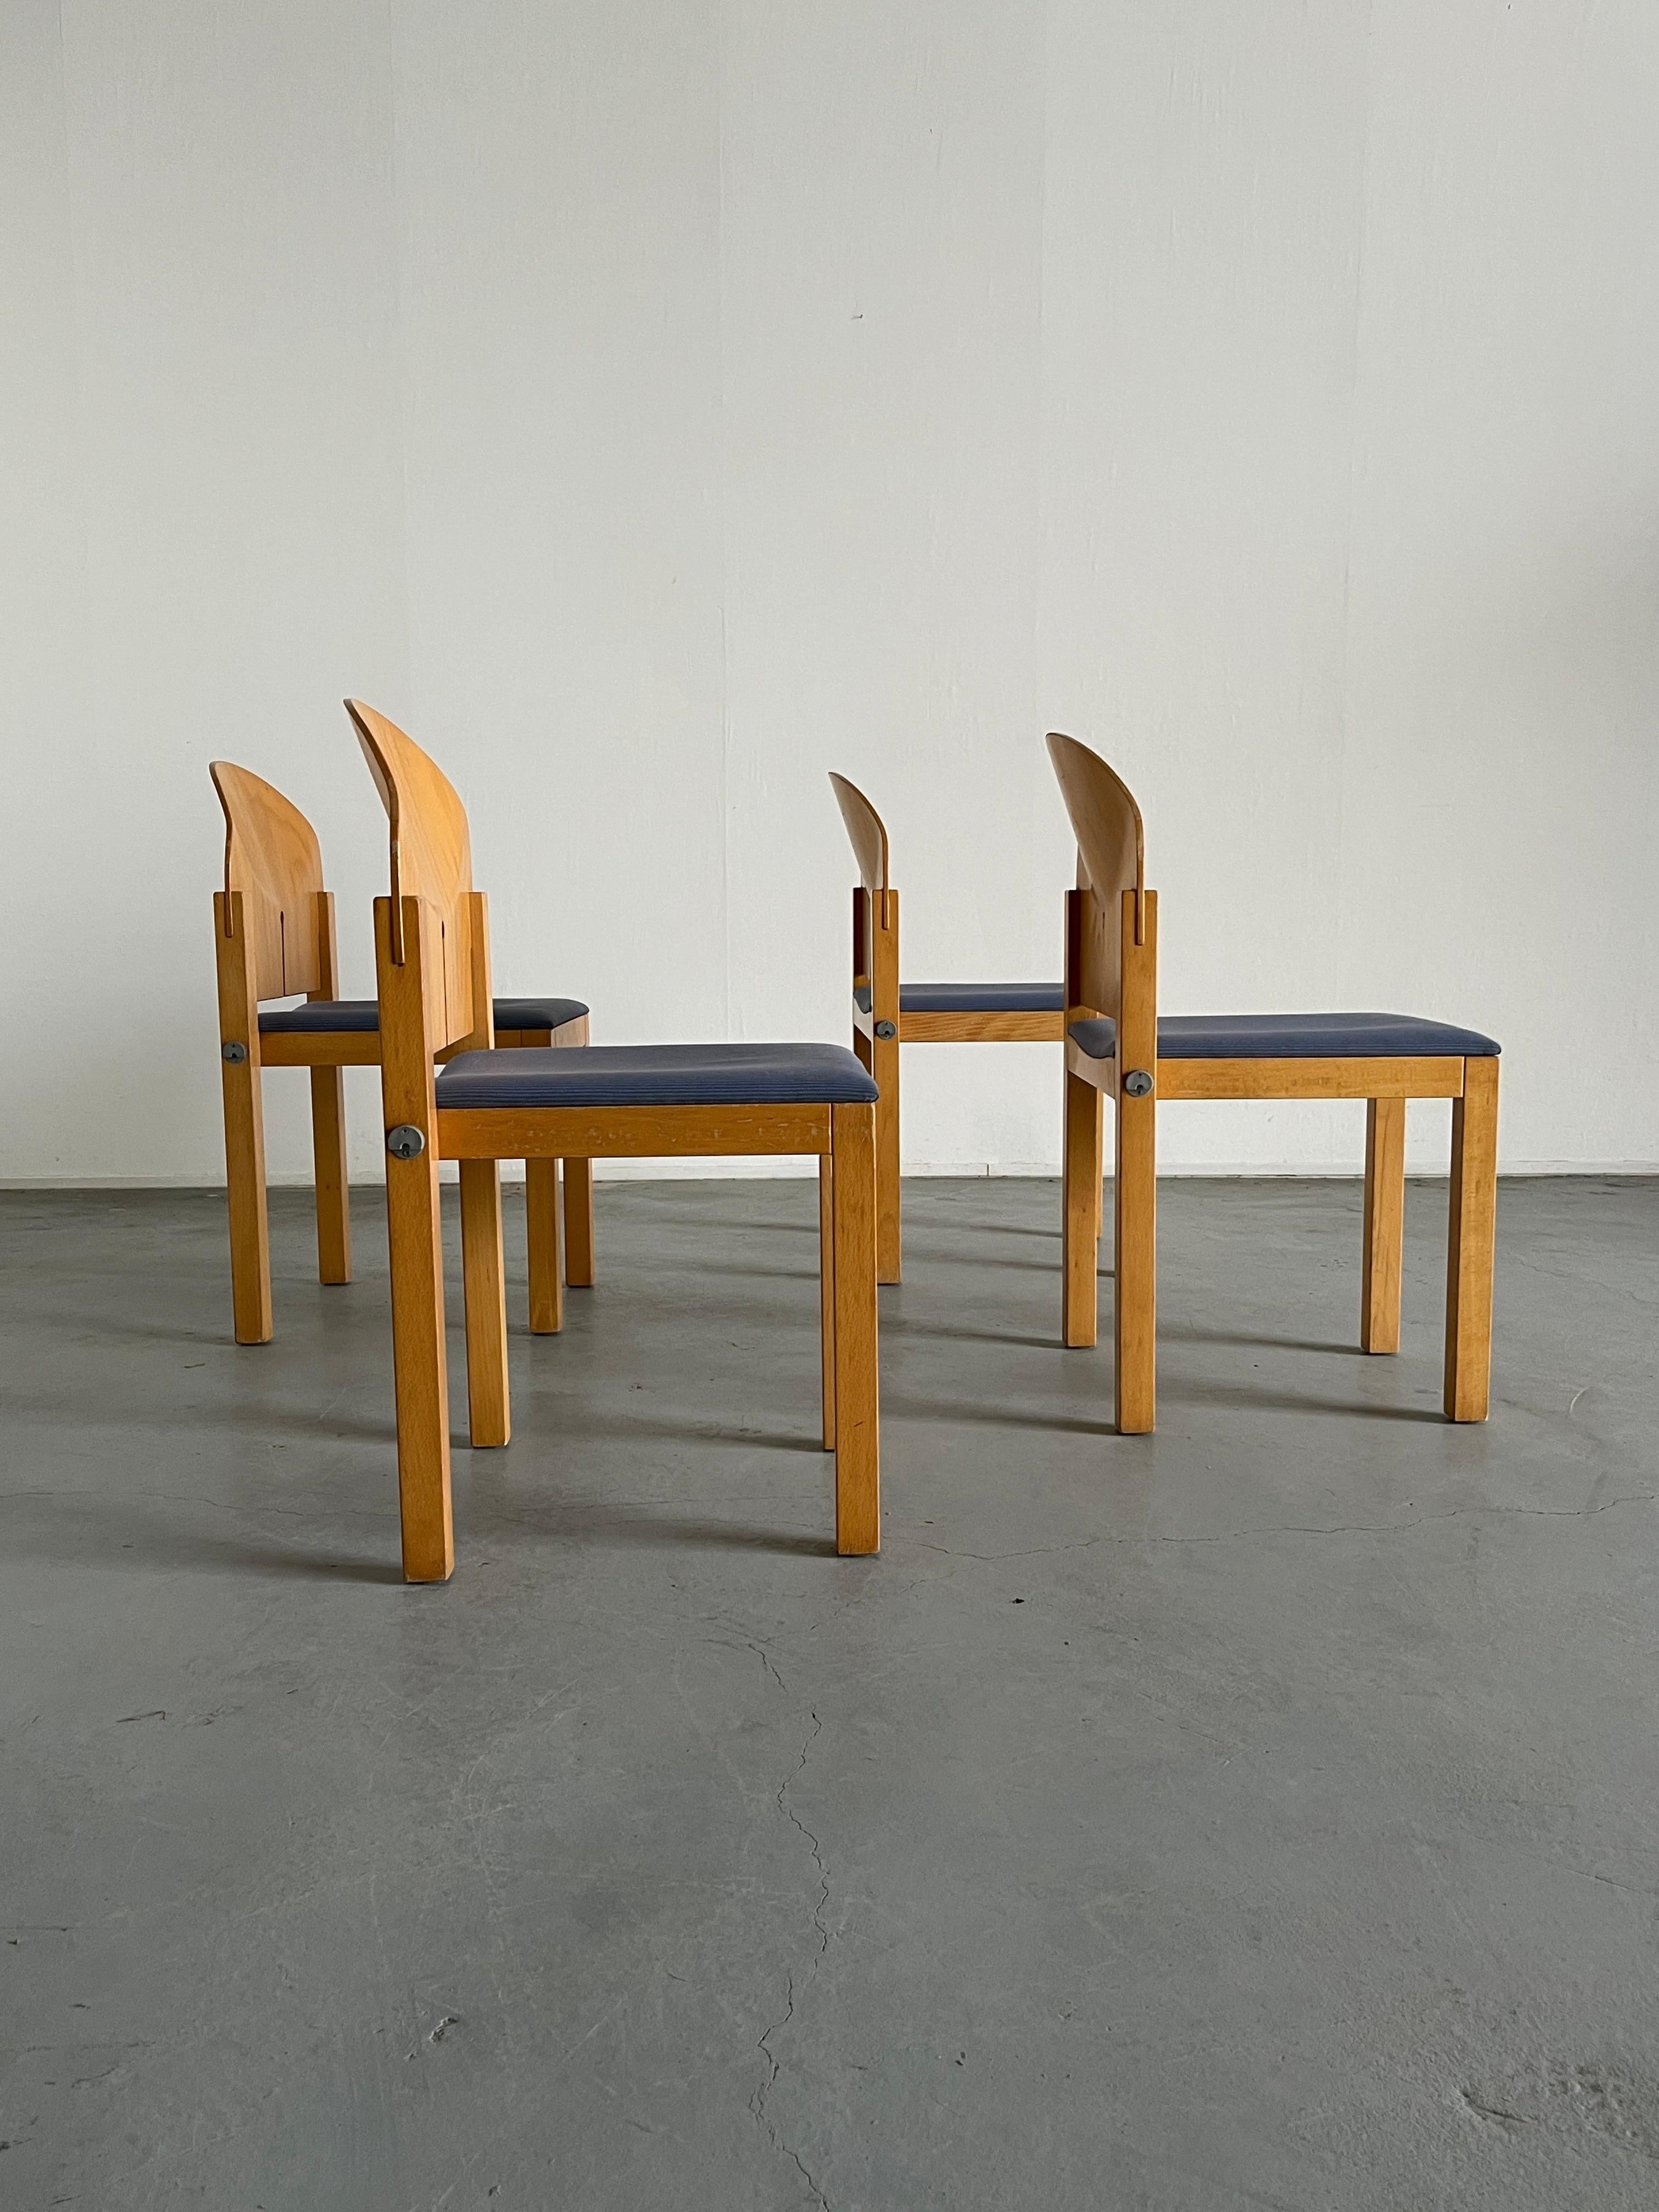 Late 20th Century Set of 4 Postmodern Sculptural Wooden Dining Chairs by Arno Votteler, 1980s